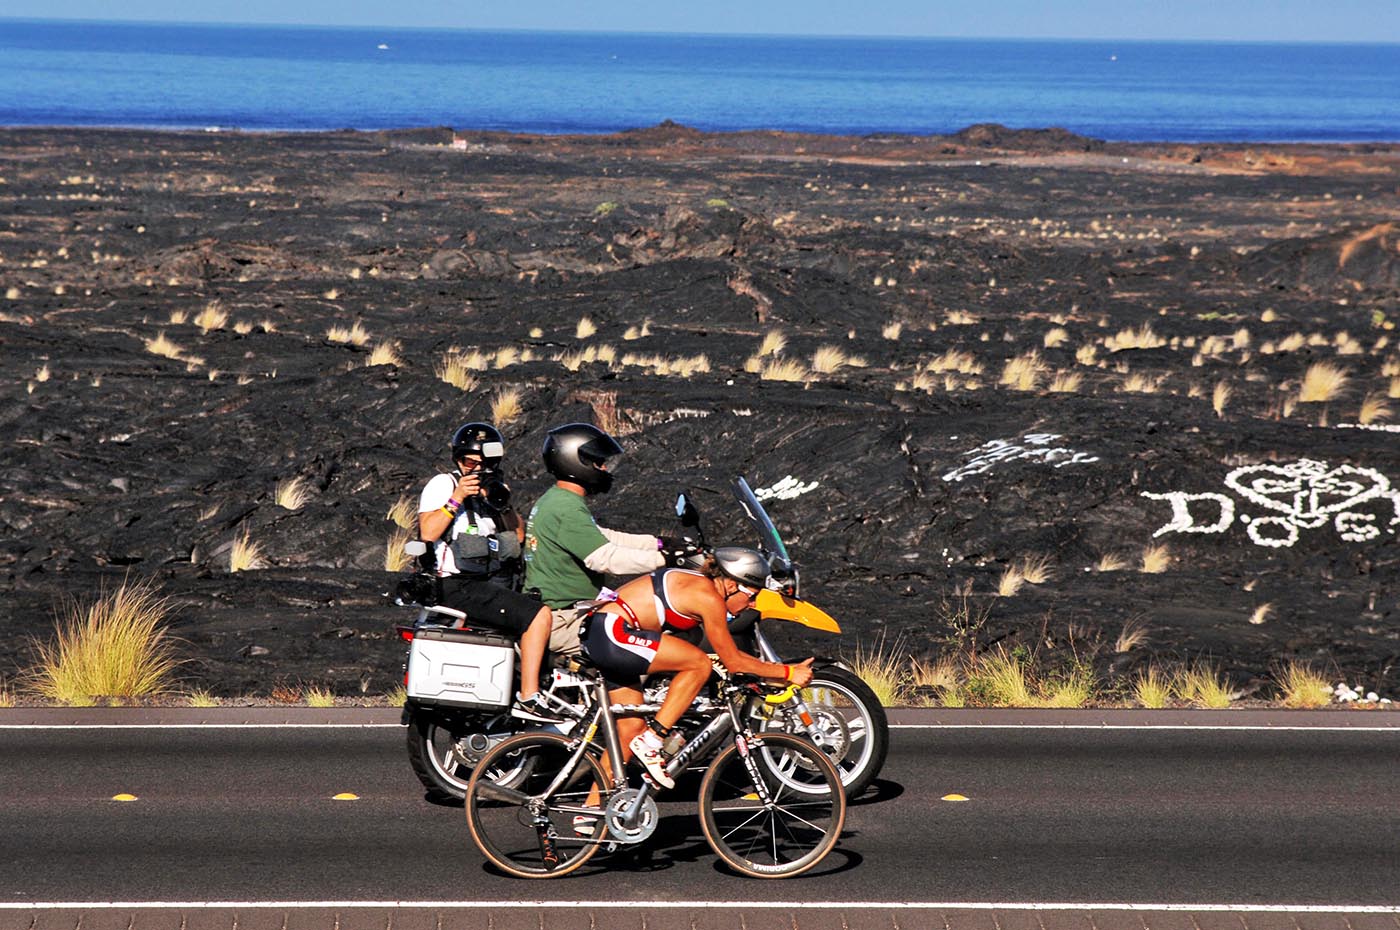 Working the female pros at Ironman Hawaii